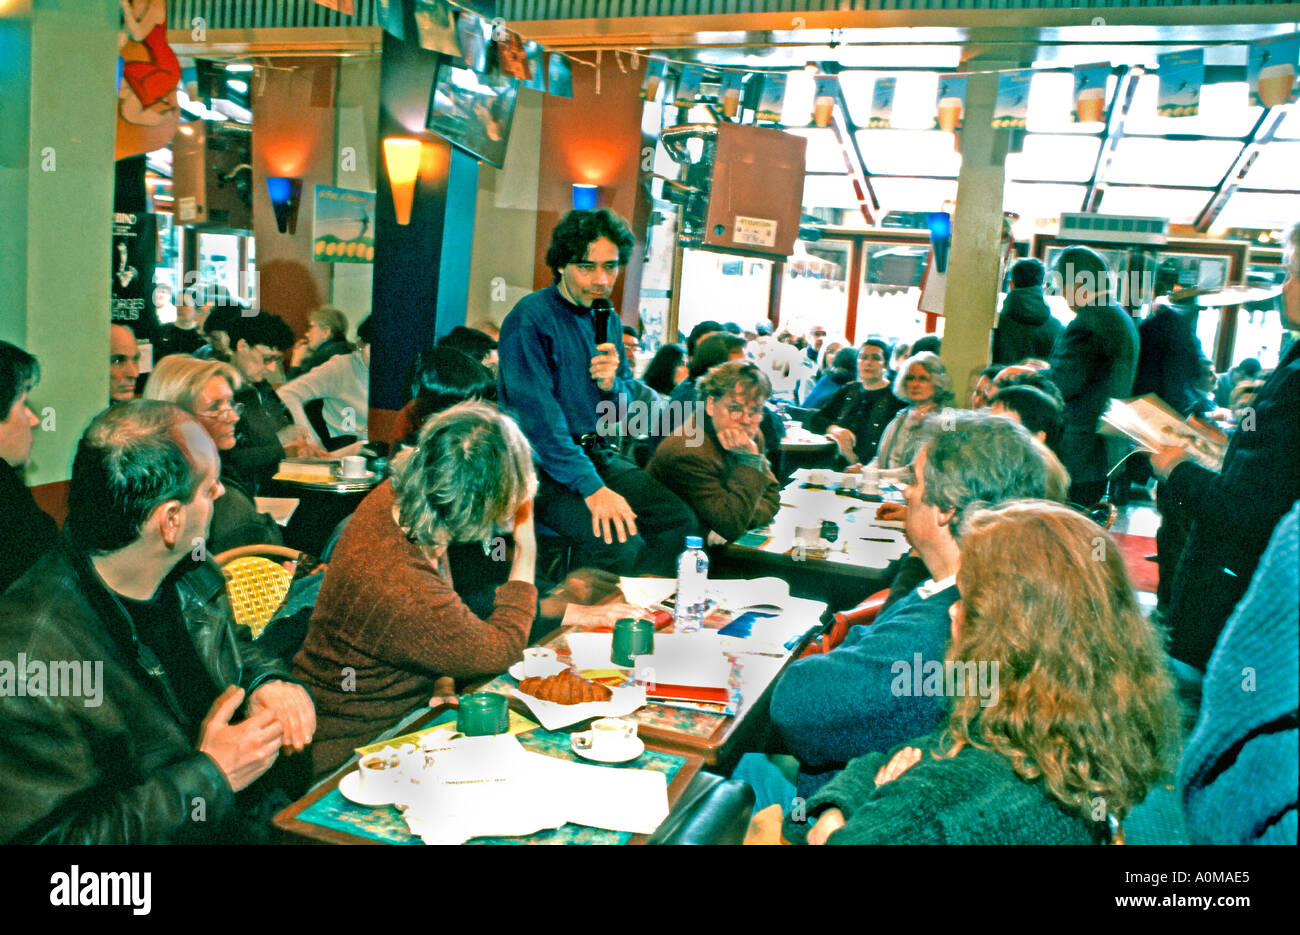 French Cafes, Paris France, Crowd people in 'Café de la Phare' Bistro Restaurant 'Cafe Philosophic' event, group drinking coffee bar Stock Photo